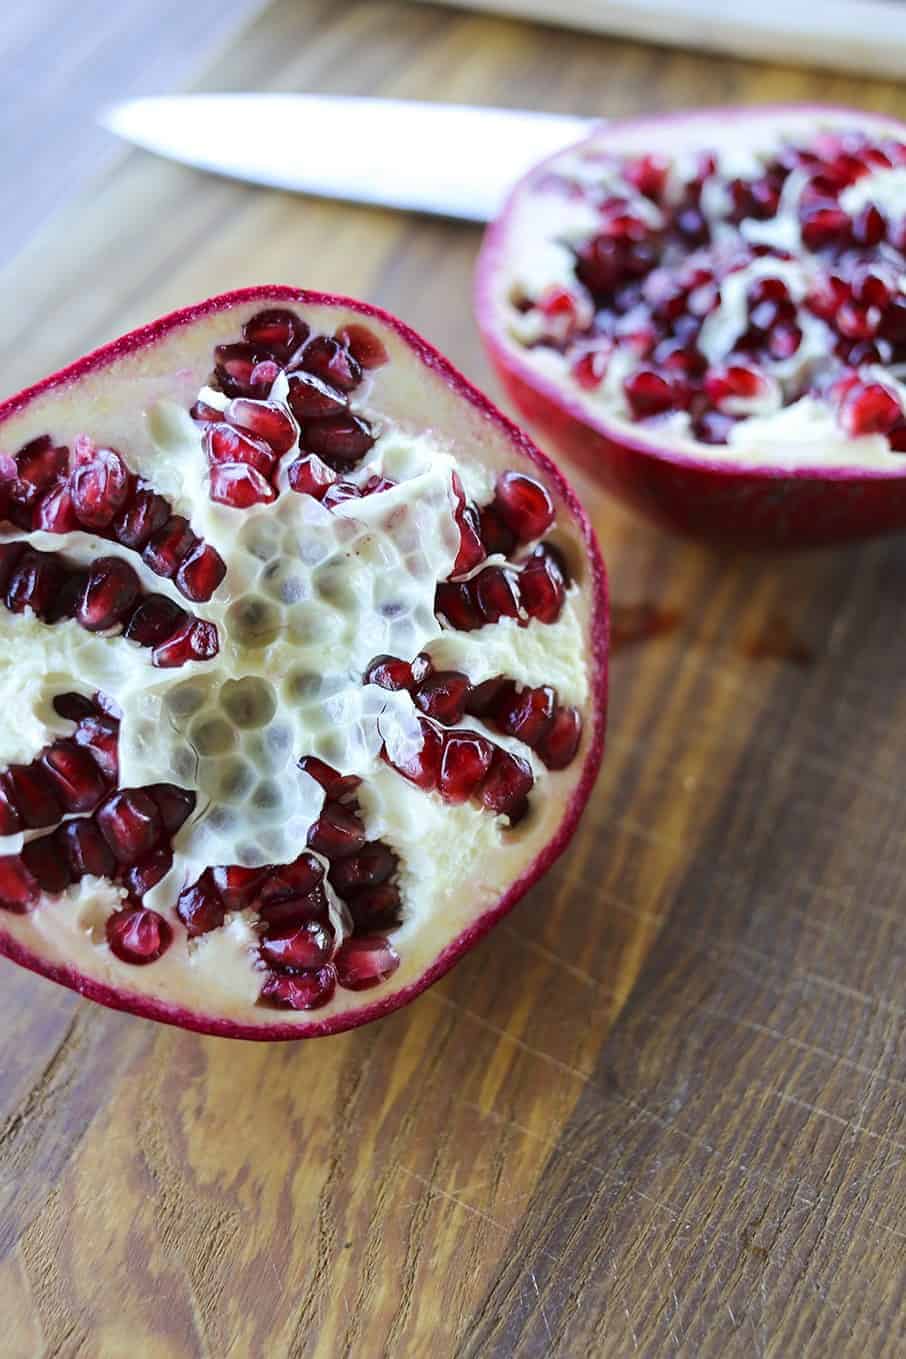 How to Deseed a Pomegranate in about 1 Minute